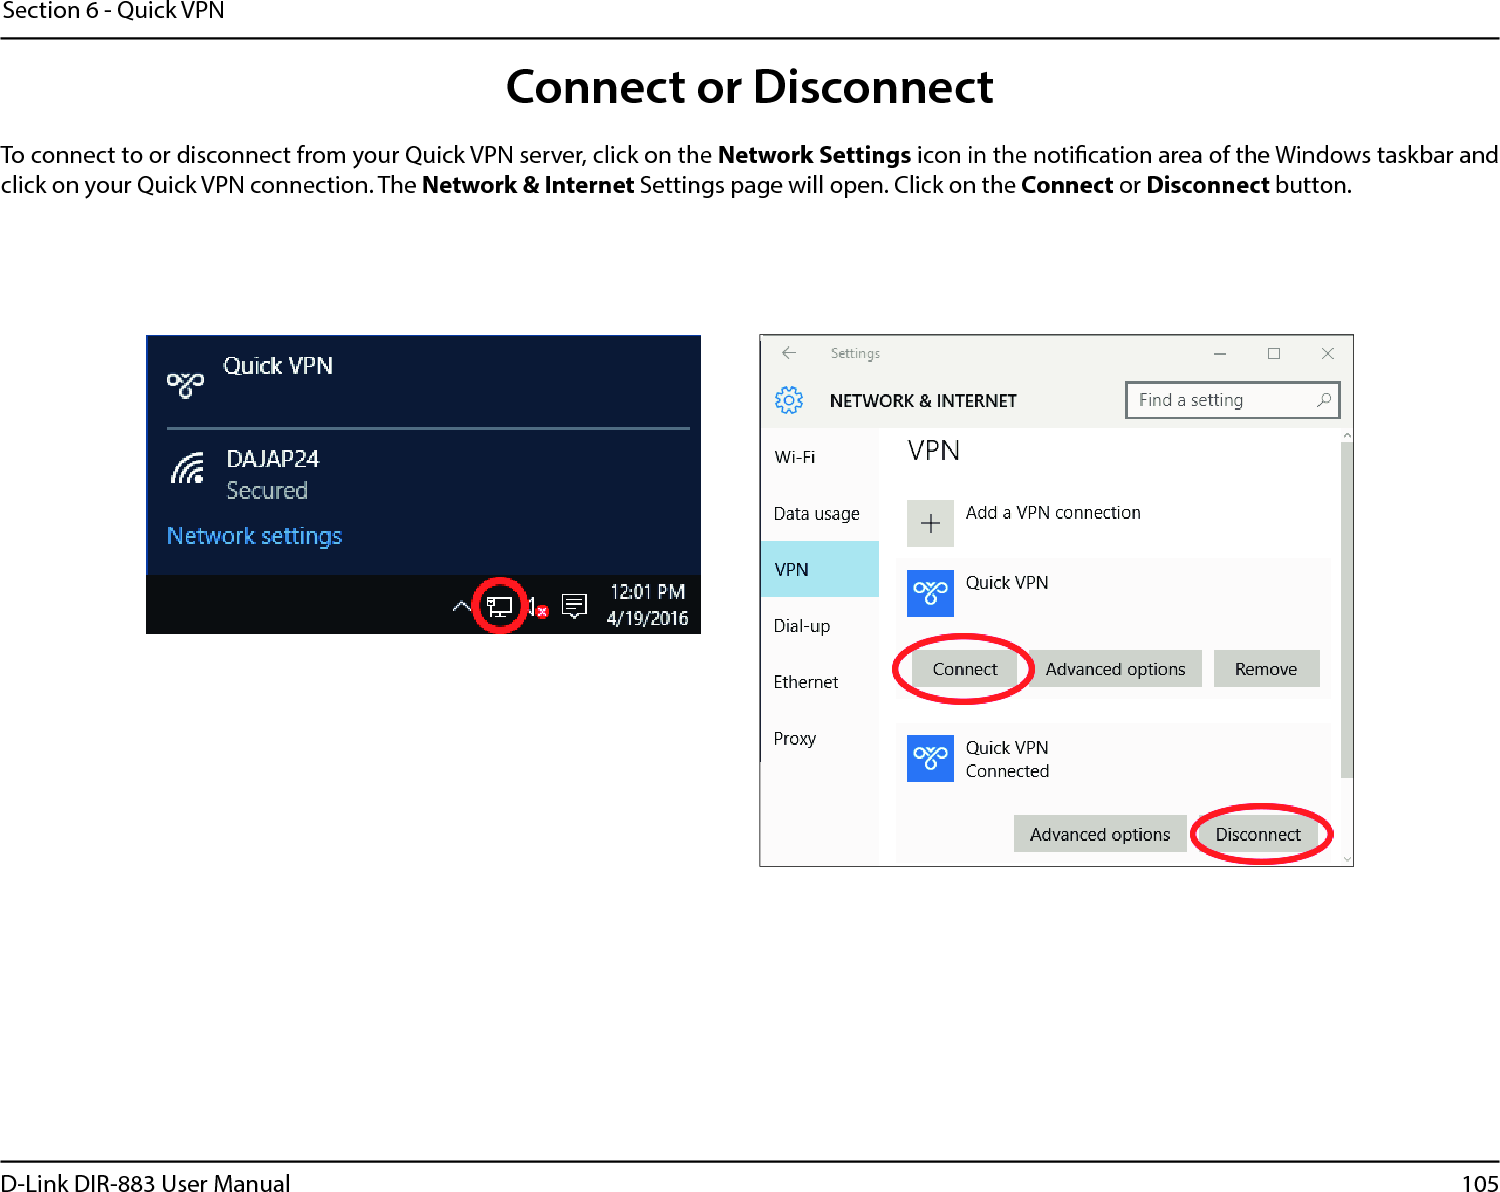 105D-Link DIR-883 User ManualSection 6 - Quick VPNConnect or DisconnectTo connect to or disconnect from your Quick VPN server, click on the Network Settings icon in the notication area of the Windows taskbar and click on your Quick VPN connection. The Network &amp; Internet Settings page will open. Click on the Connect or Disconnect button.